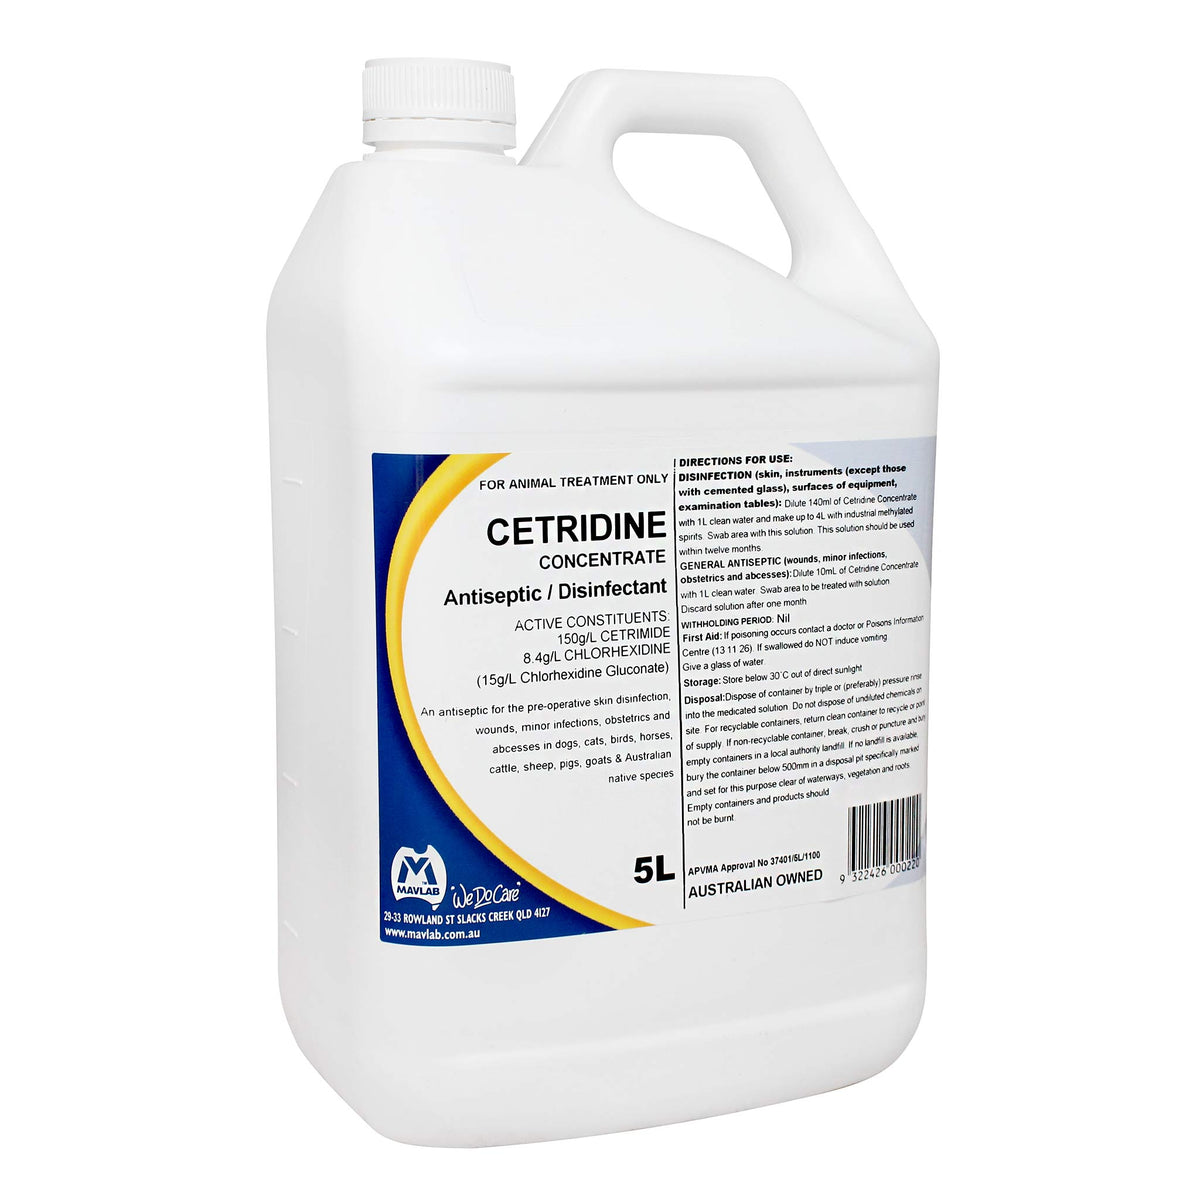 Cetridine Concentrate Antiseptic/Disinfectant 5L